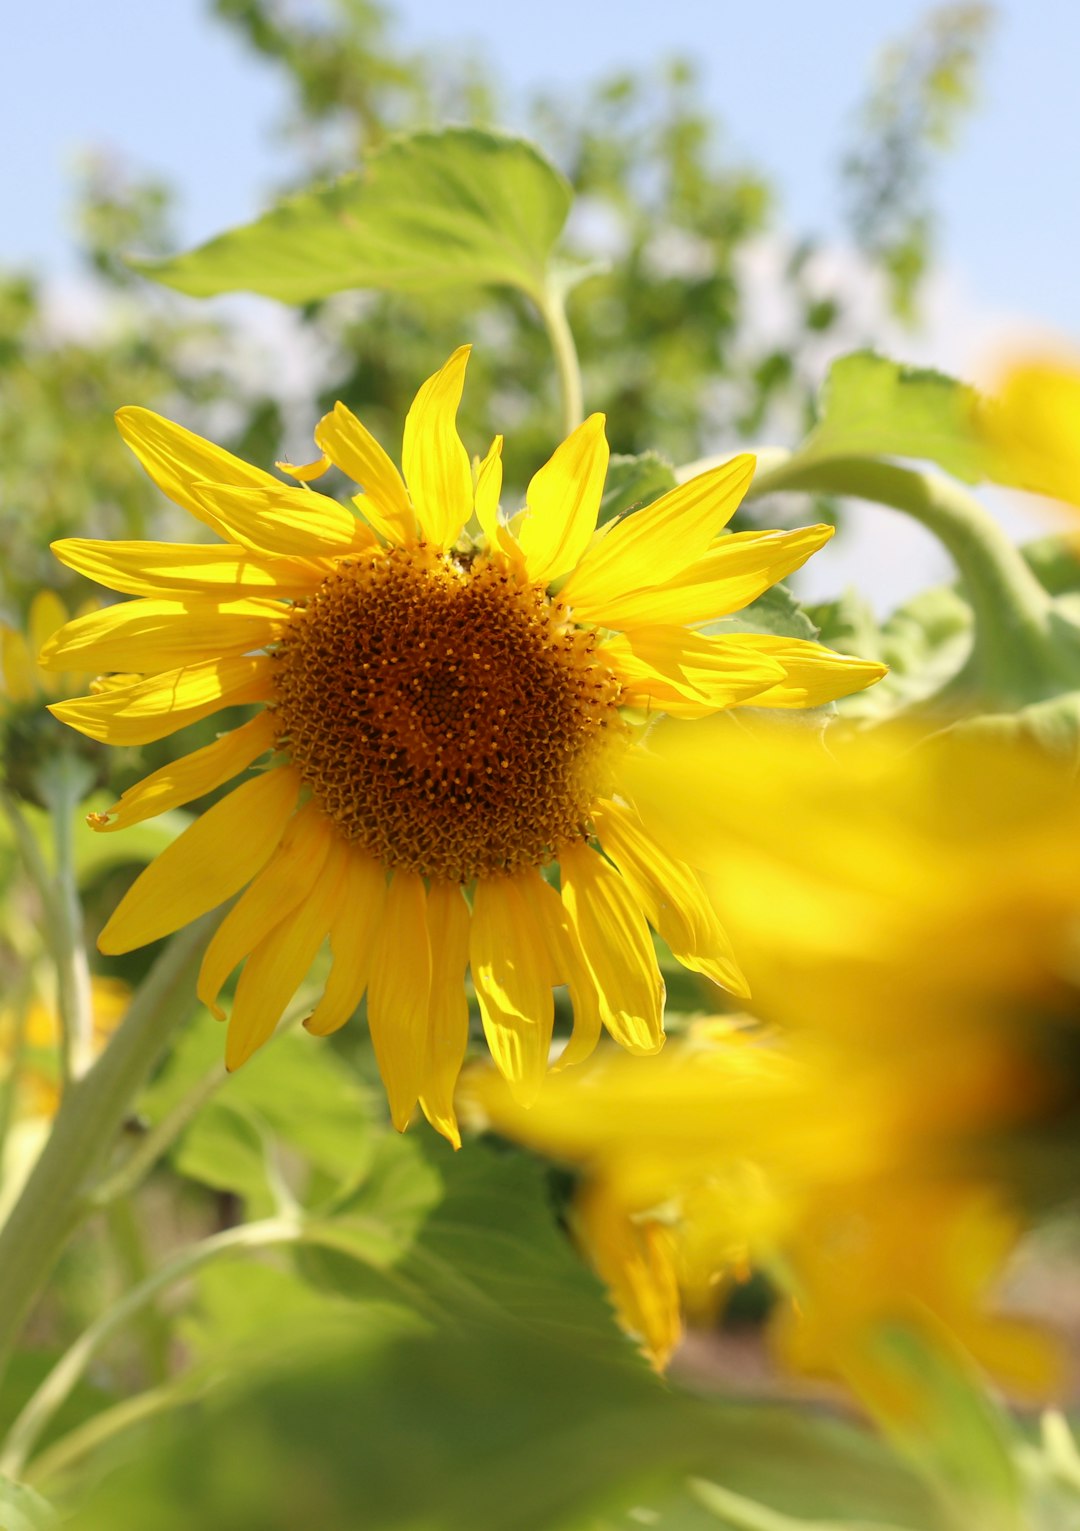 selective focus photography of sunflower